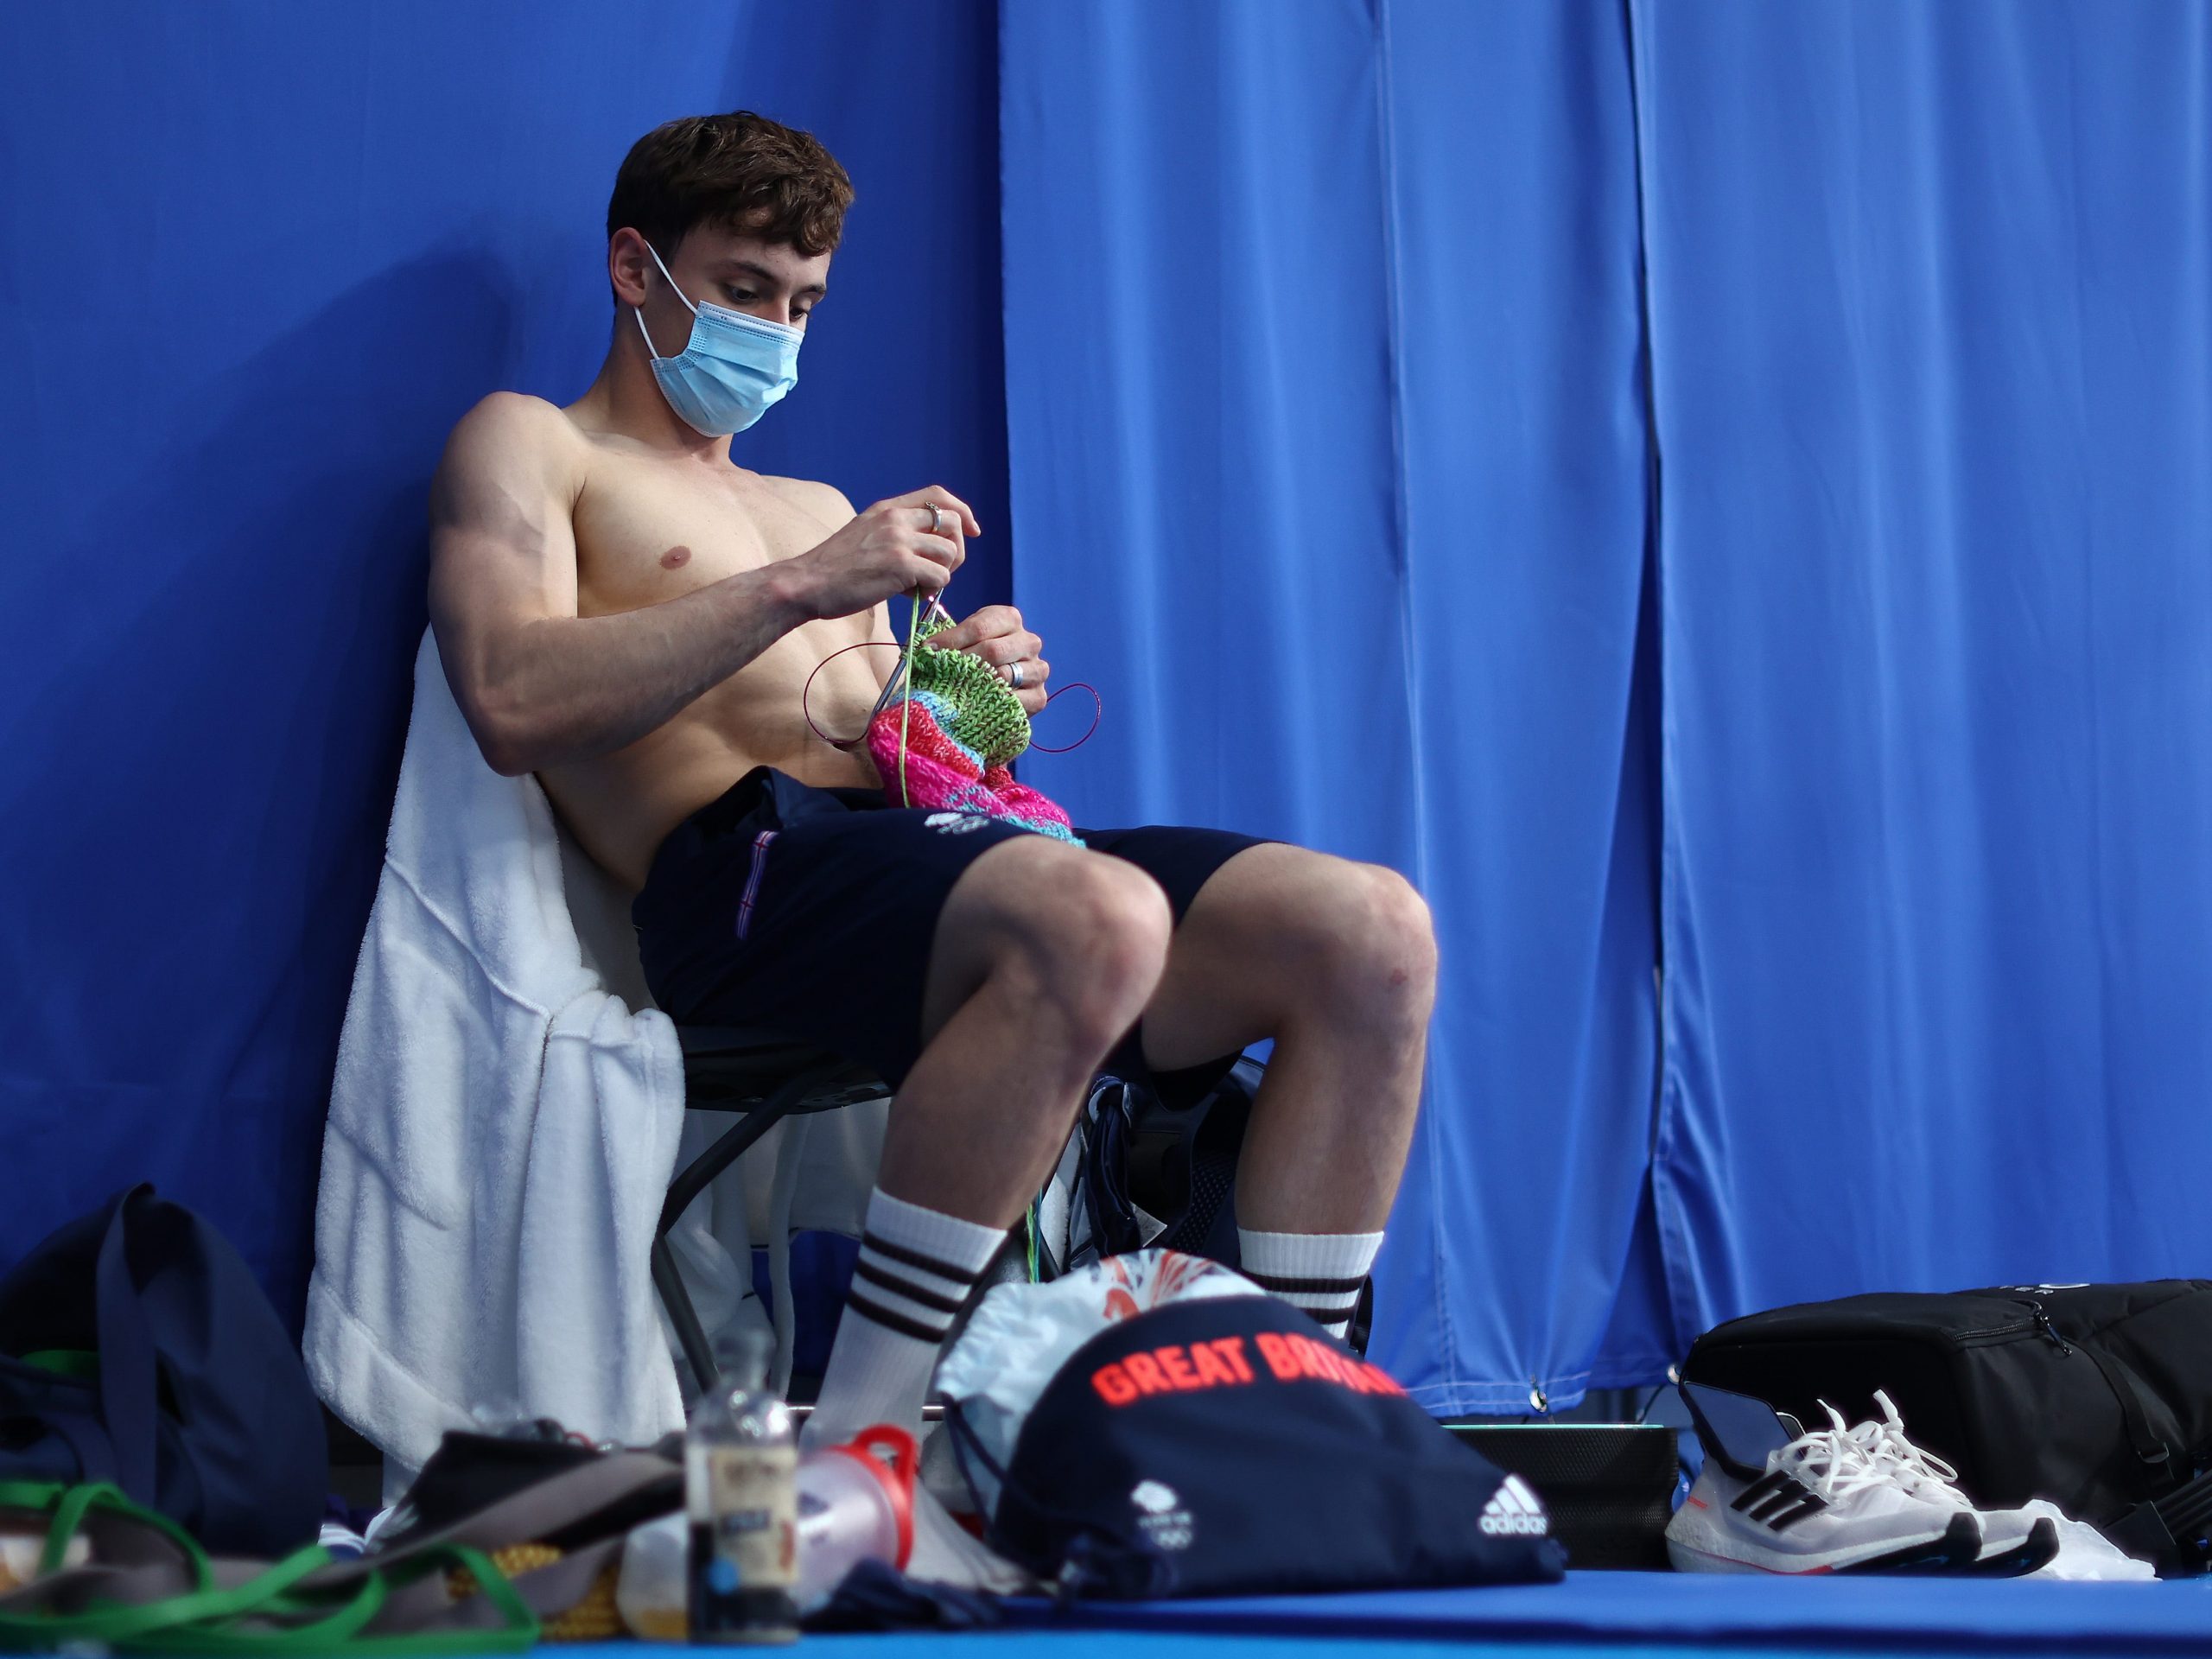 Thomas Daley of Team Great Britain is seen knitting before the Men's 10m Platform Final on day fifteen of the Tokyo 2020 Olympic Games at Tokyo Aquatics Centre on August 07, 2021 in Tokyo, Japan.